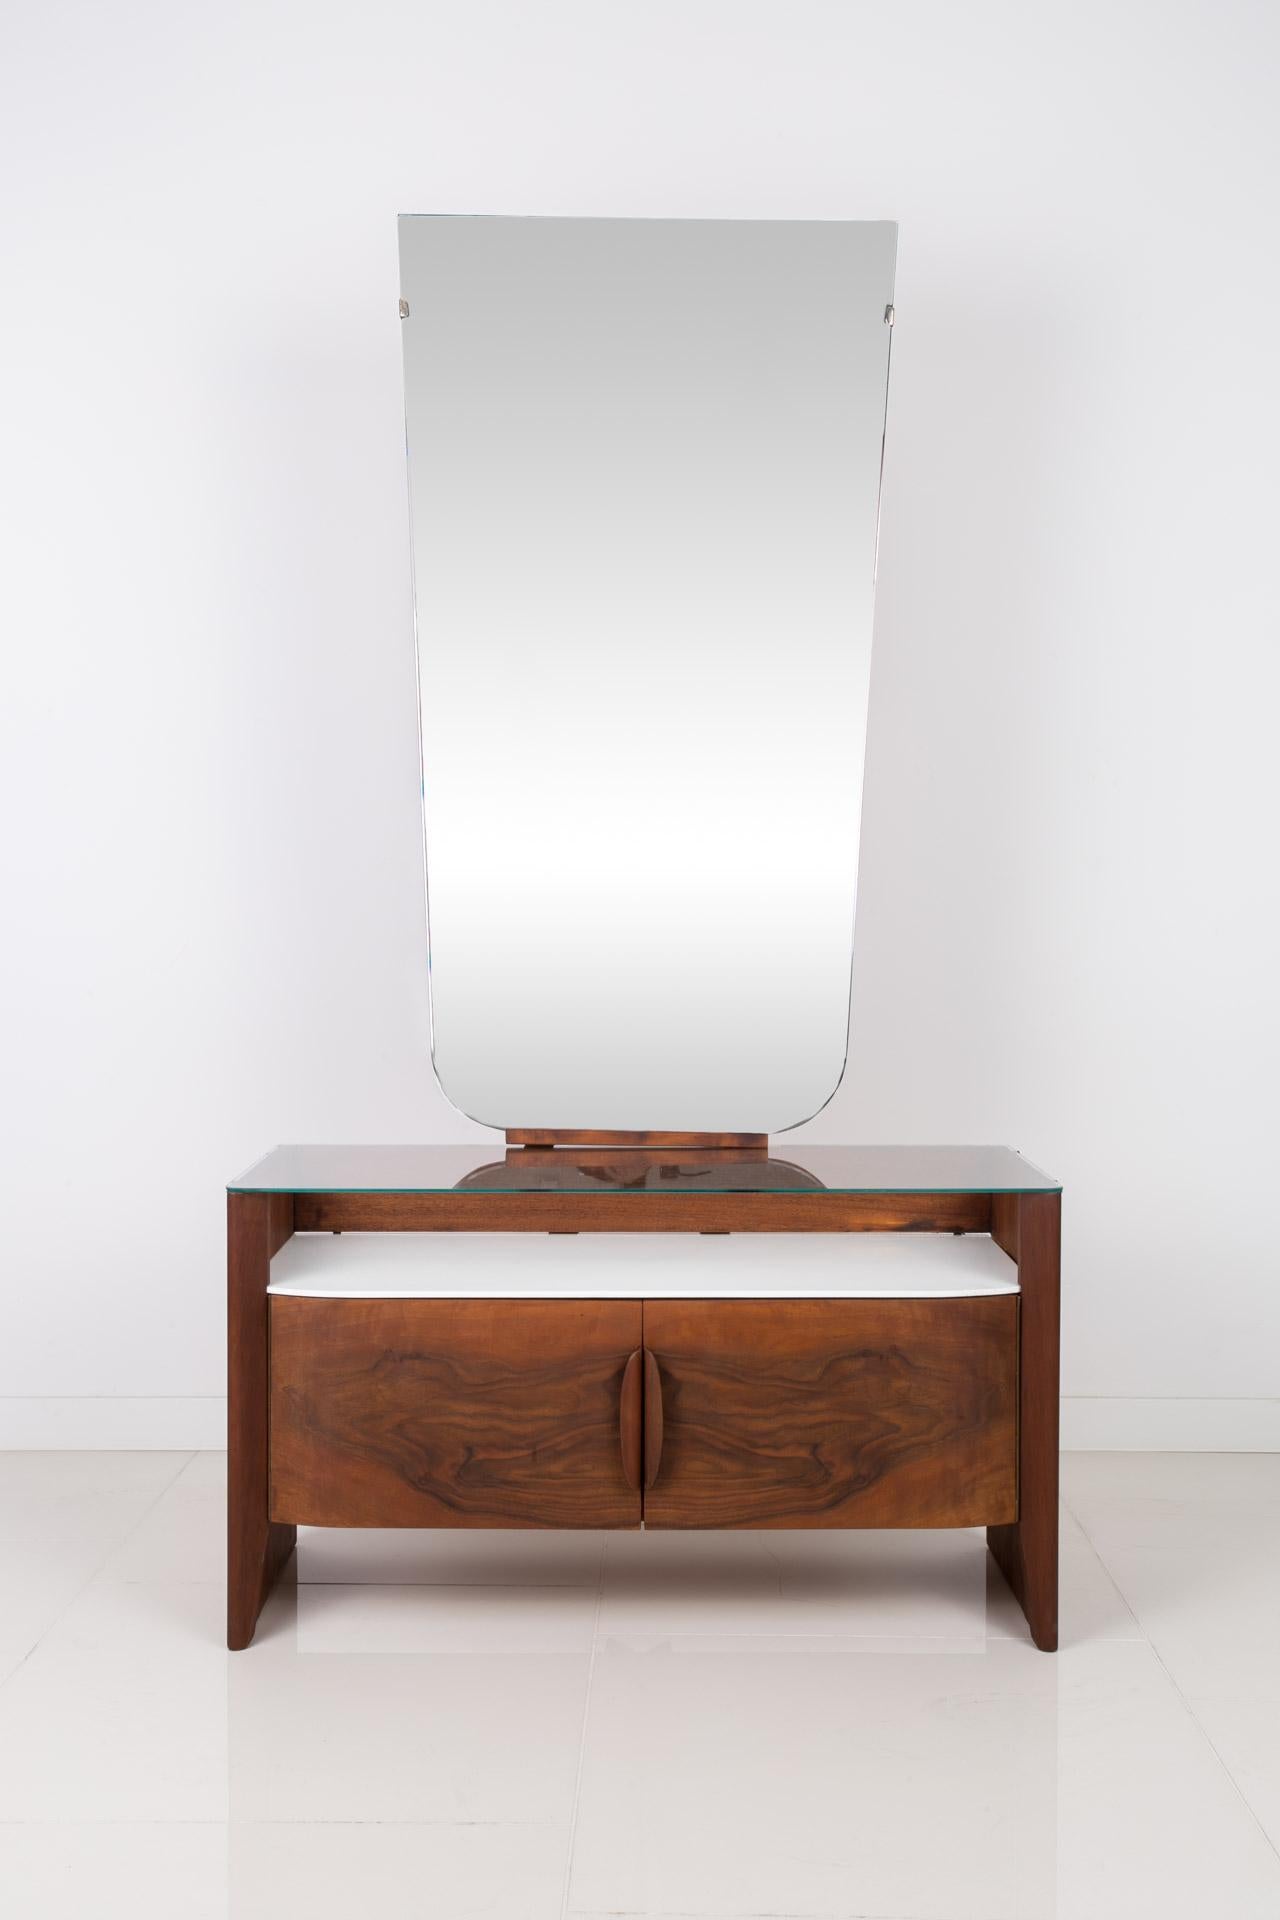 This dressing table was designed by famous Czech designer Jindrich Halabala and manufactured around 1950s. The piece is in very good original condition. It features a big vertical mirror and a practical storage space below it. Wooden elements are